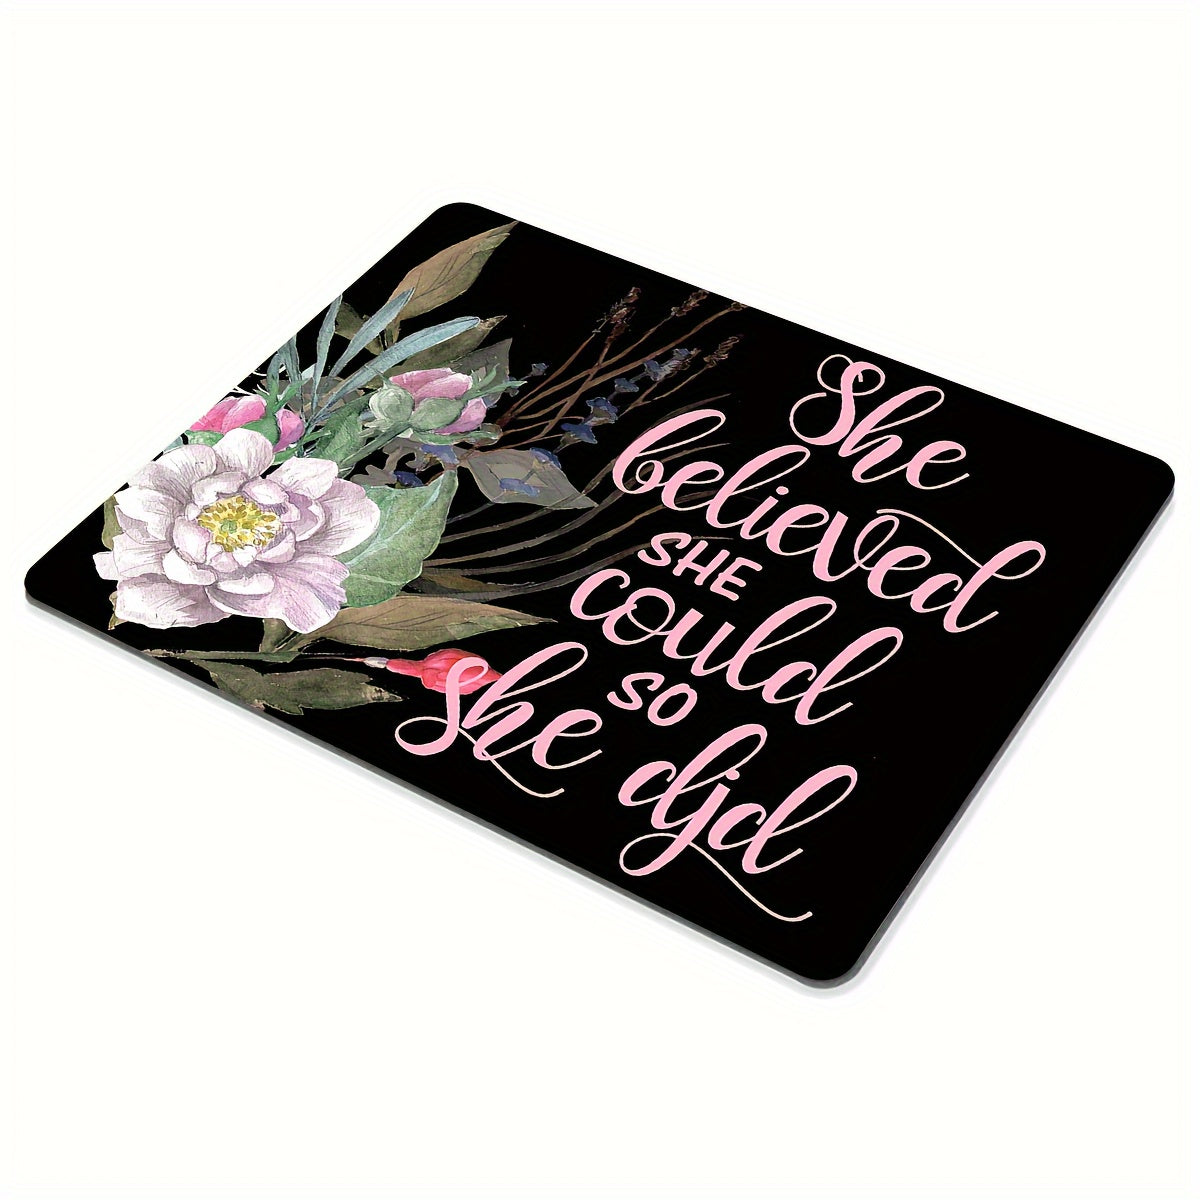 1pc She Believed She Could So She Did Christian Computer Mouse Pad, 9.5 X 7.9 Inch (240mmX200mmX3mm) claimedbygoddesigns